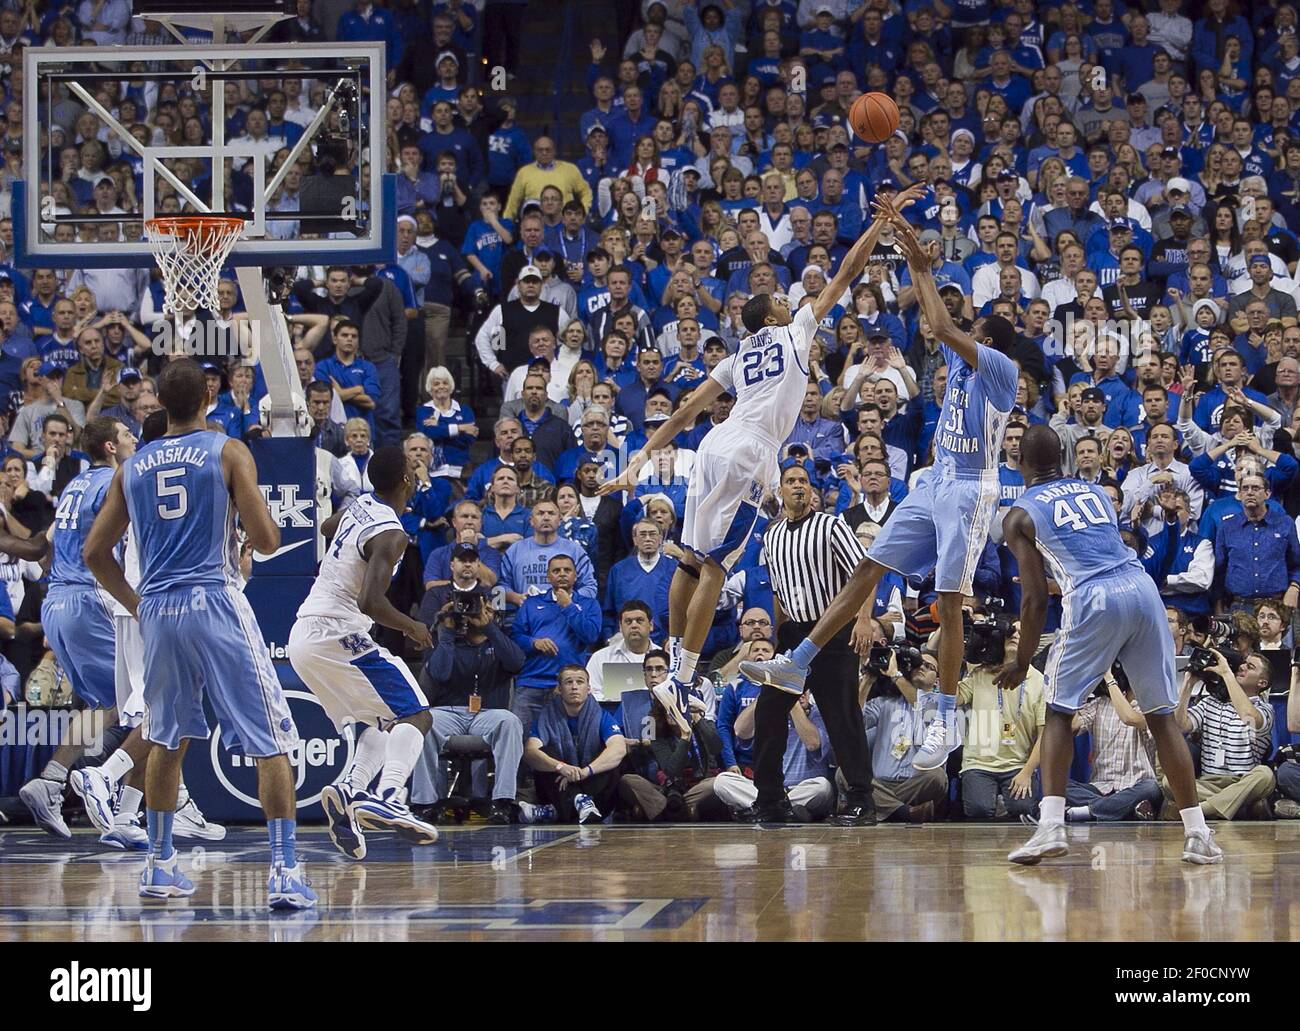 Kentucky's Anthony Davis (23) blocks a shot attempt by North Carolina's  John Henson (31) during their men's college basketball game. The University  of Kentucky Wildcats defeated the University of North Carolina Tar